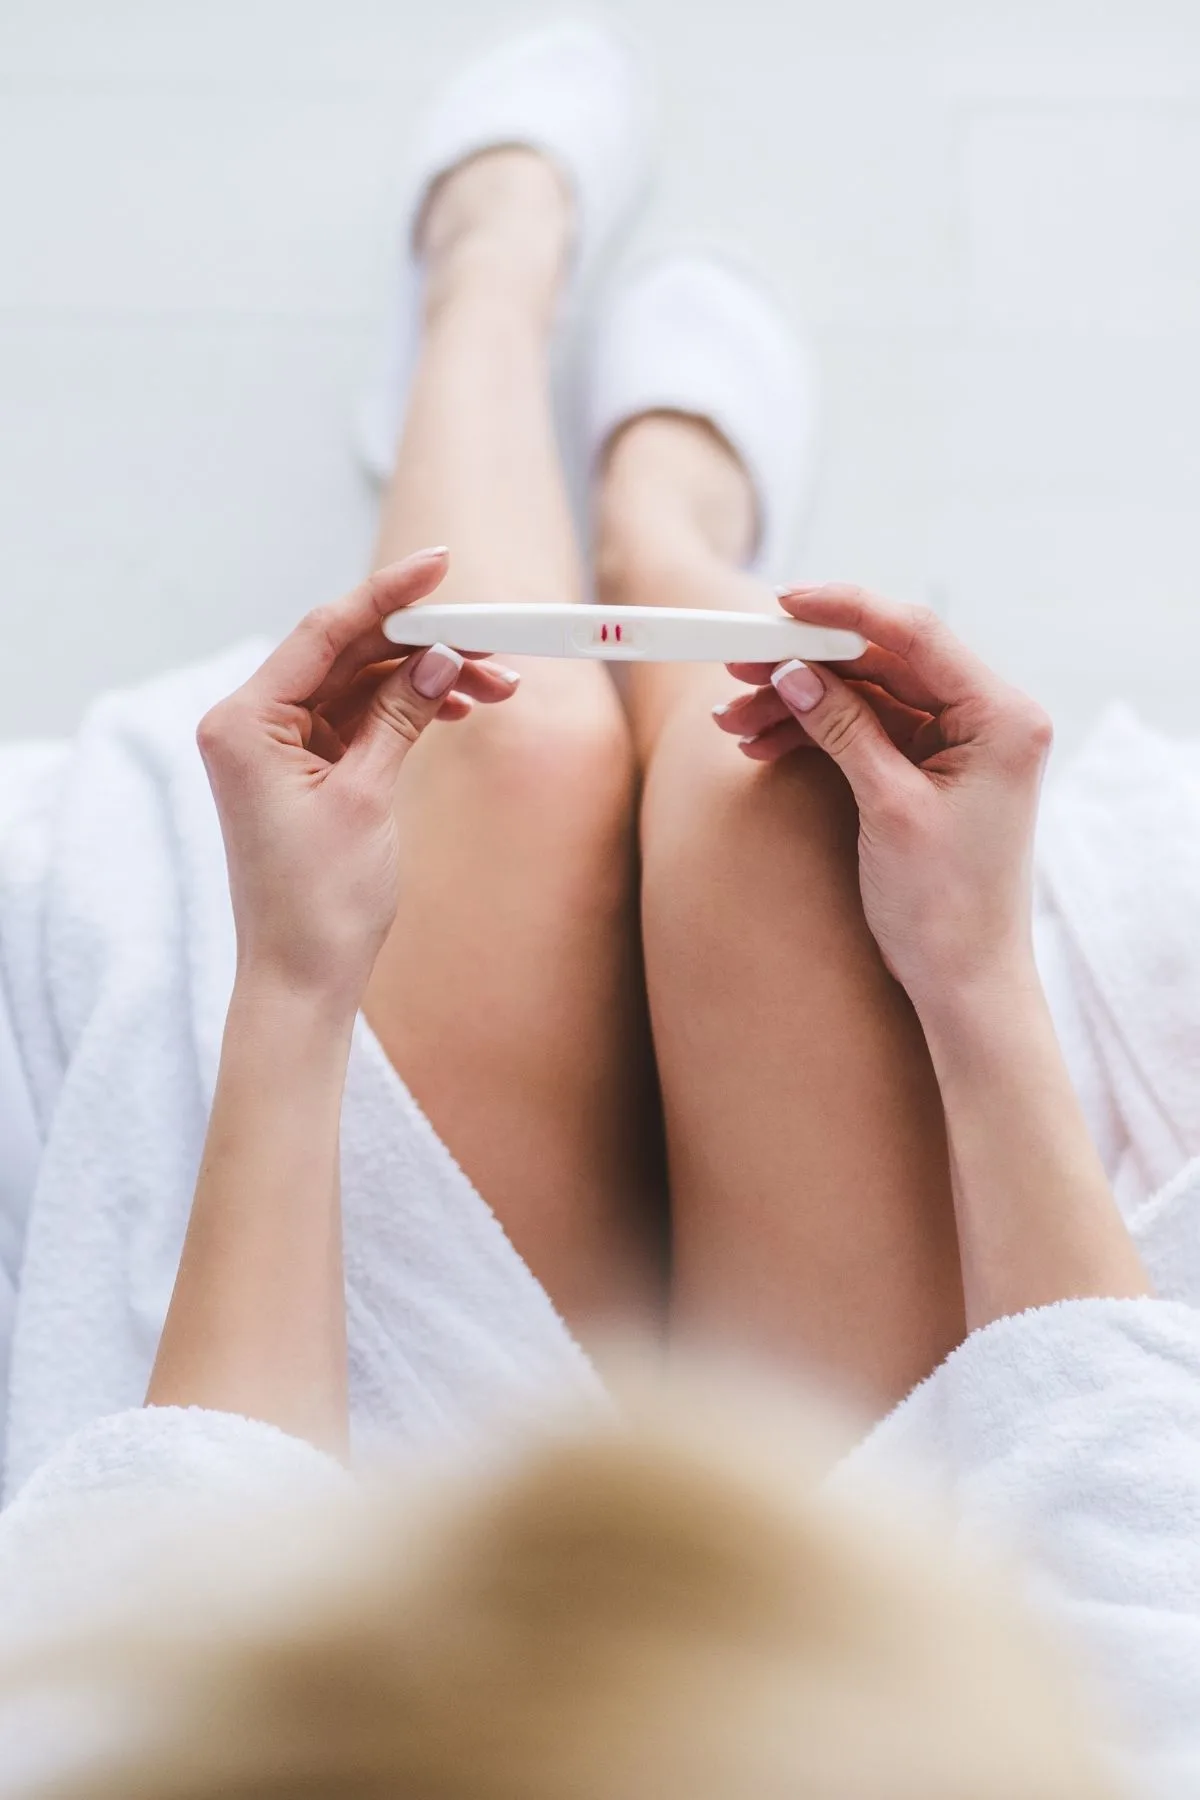 Woman wearing white robe and slippers holds positive pregnancy test above her knees.